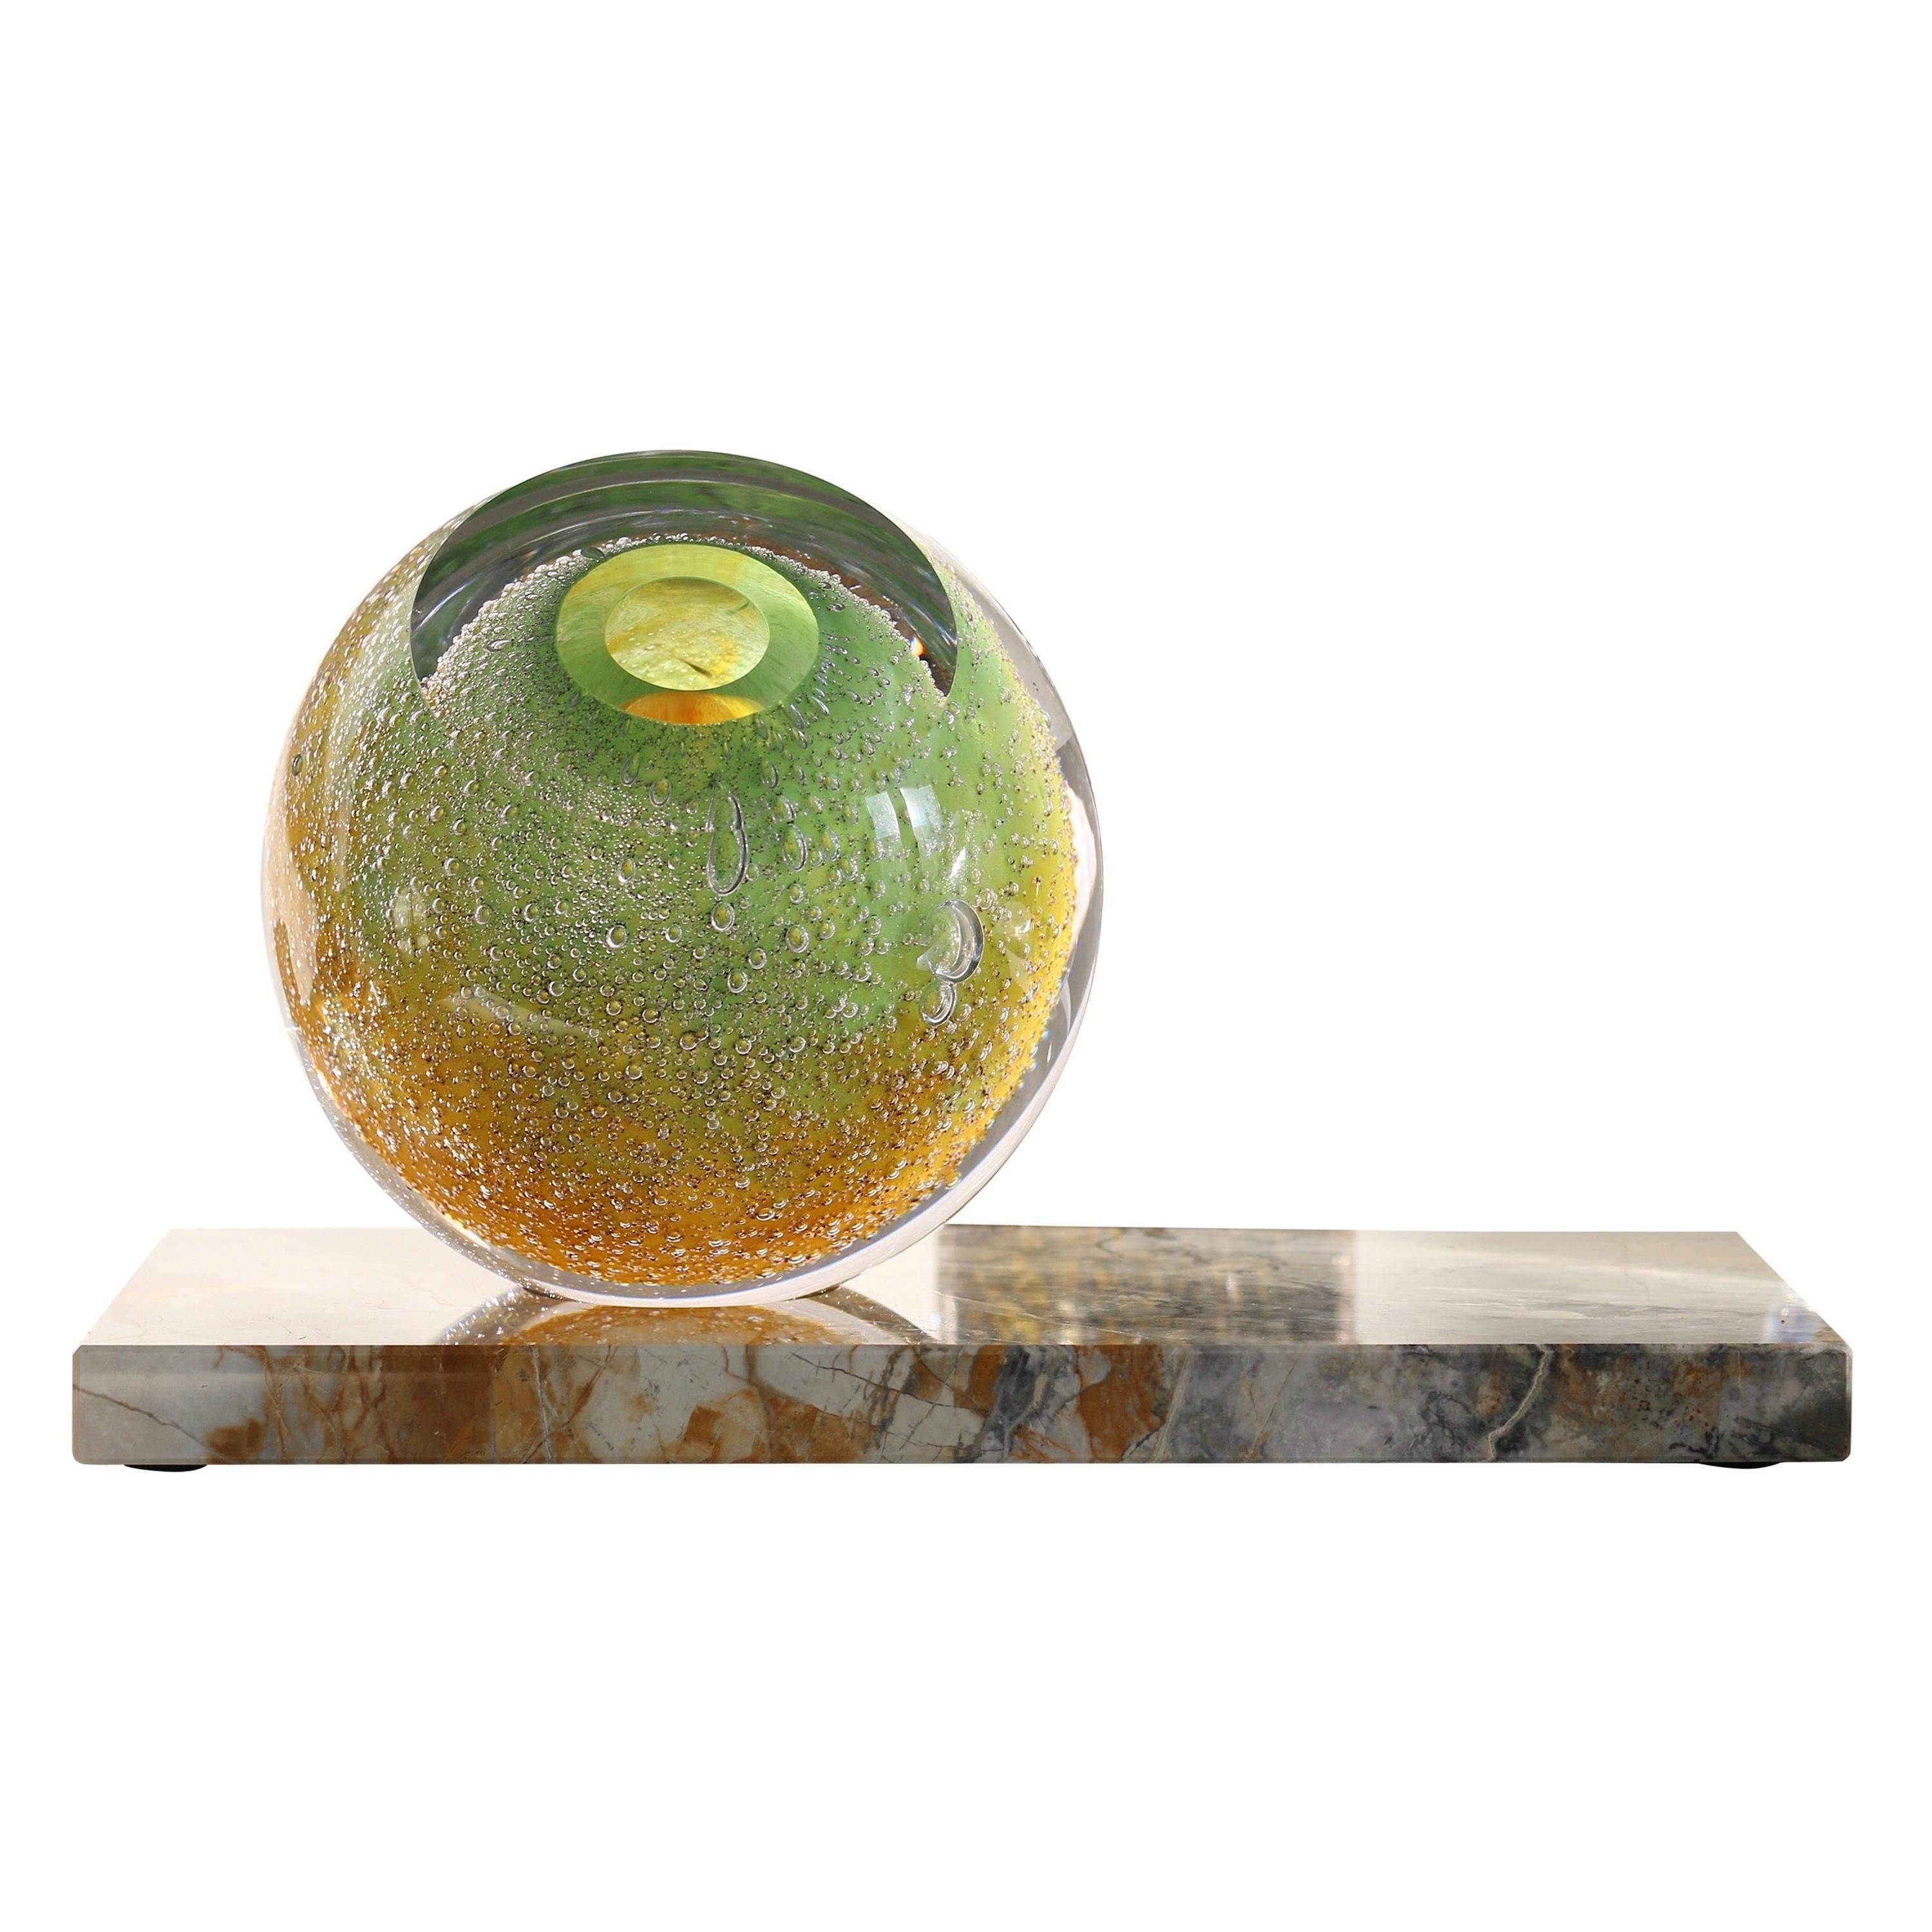 'Venus Eye' Mouth-Blown Glass Vase on Marble in Bright Green and Yellow